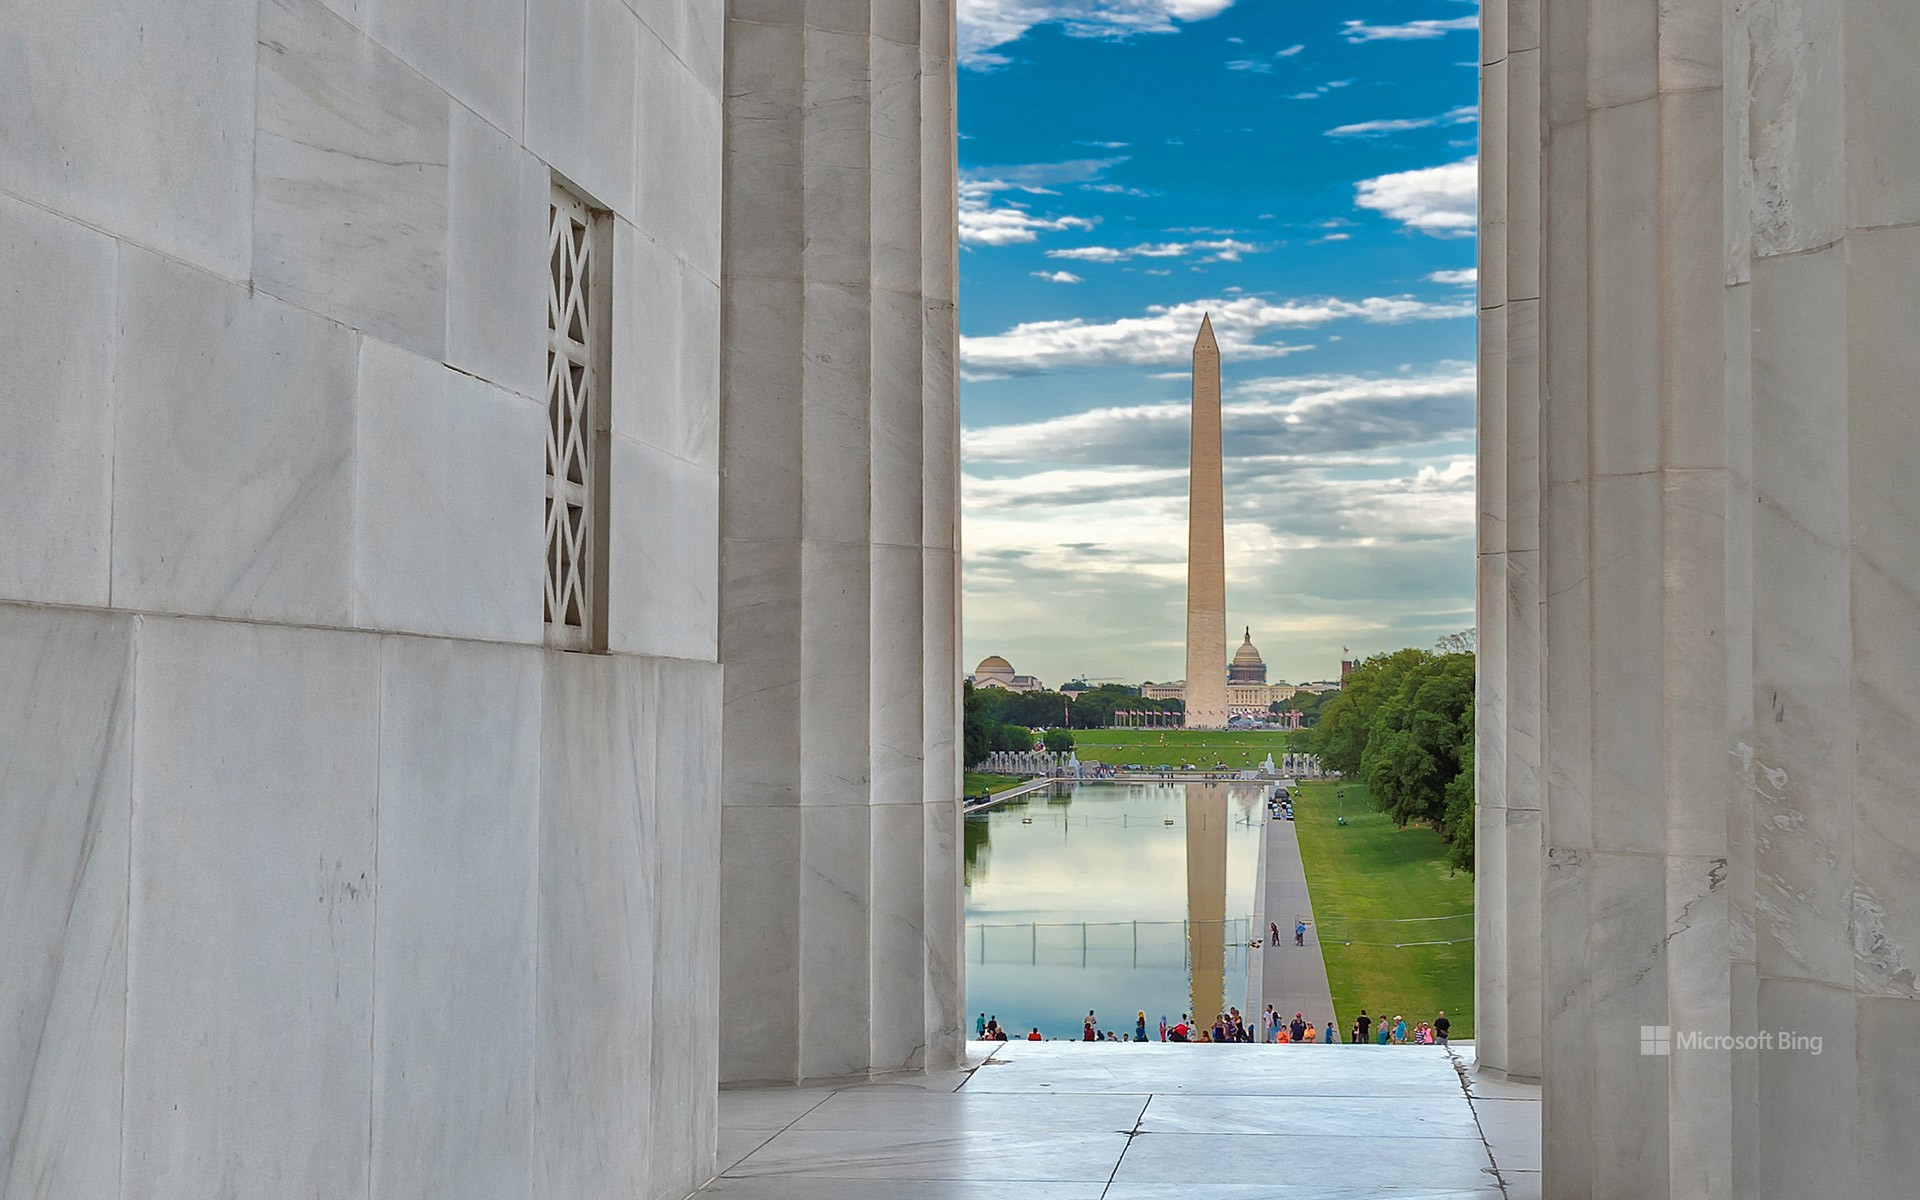 The Washington Monument seen from the Lincoln Memorial in Washington, DC